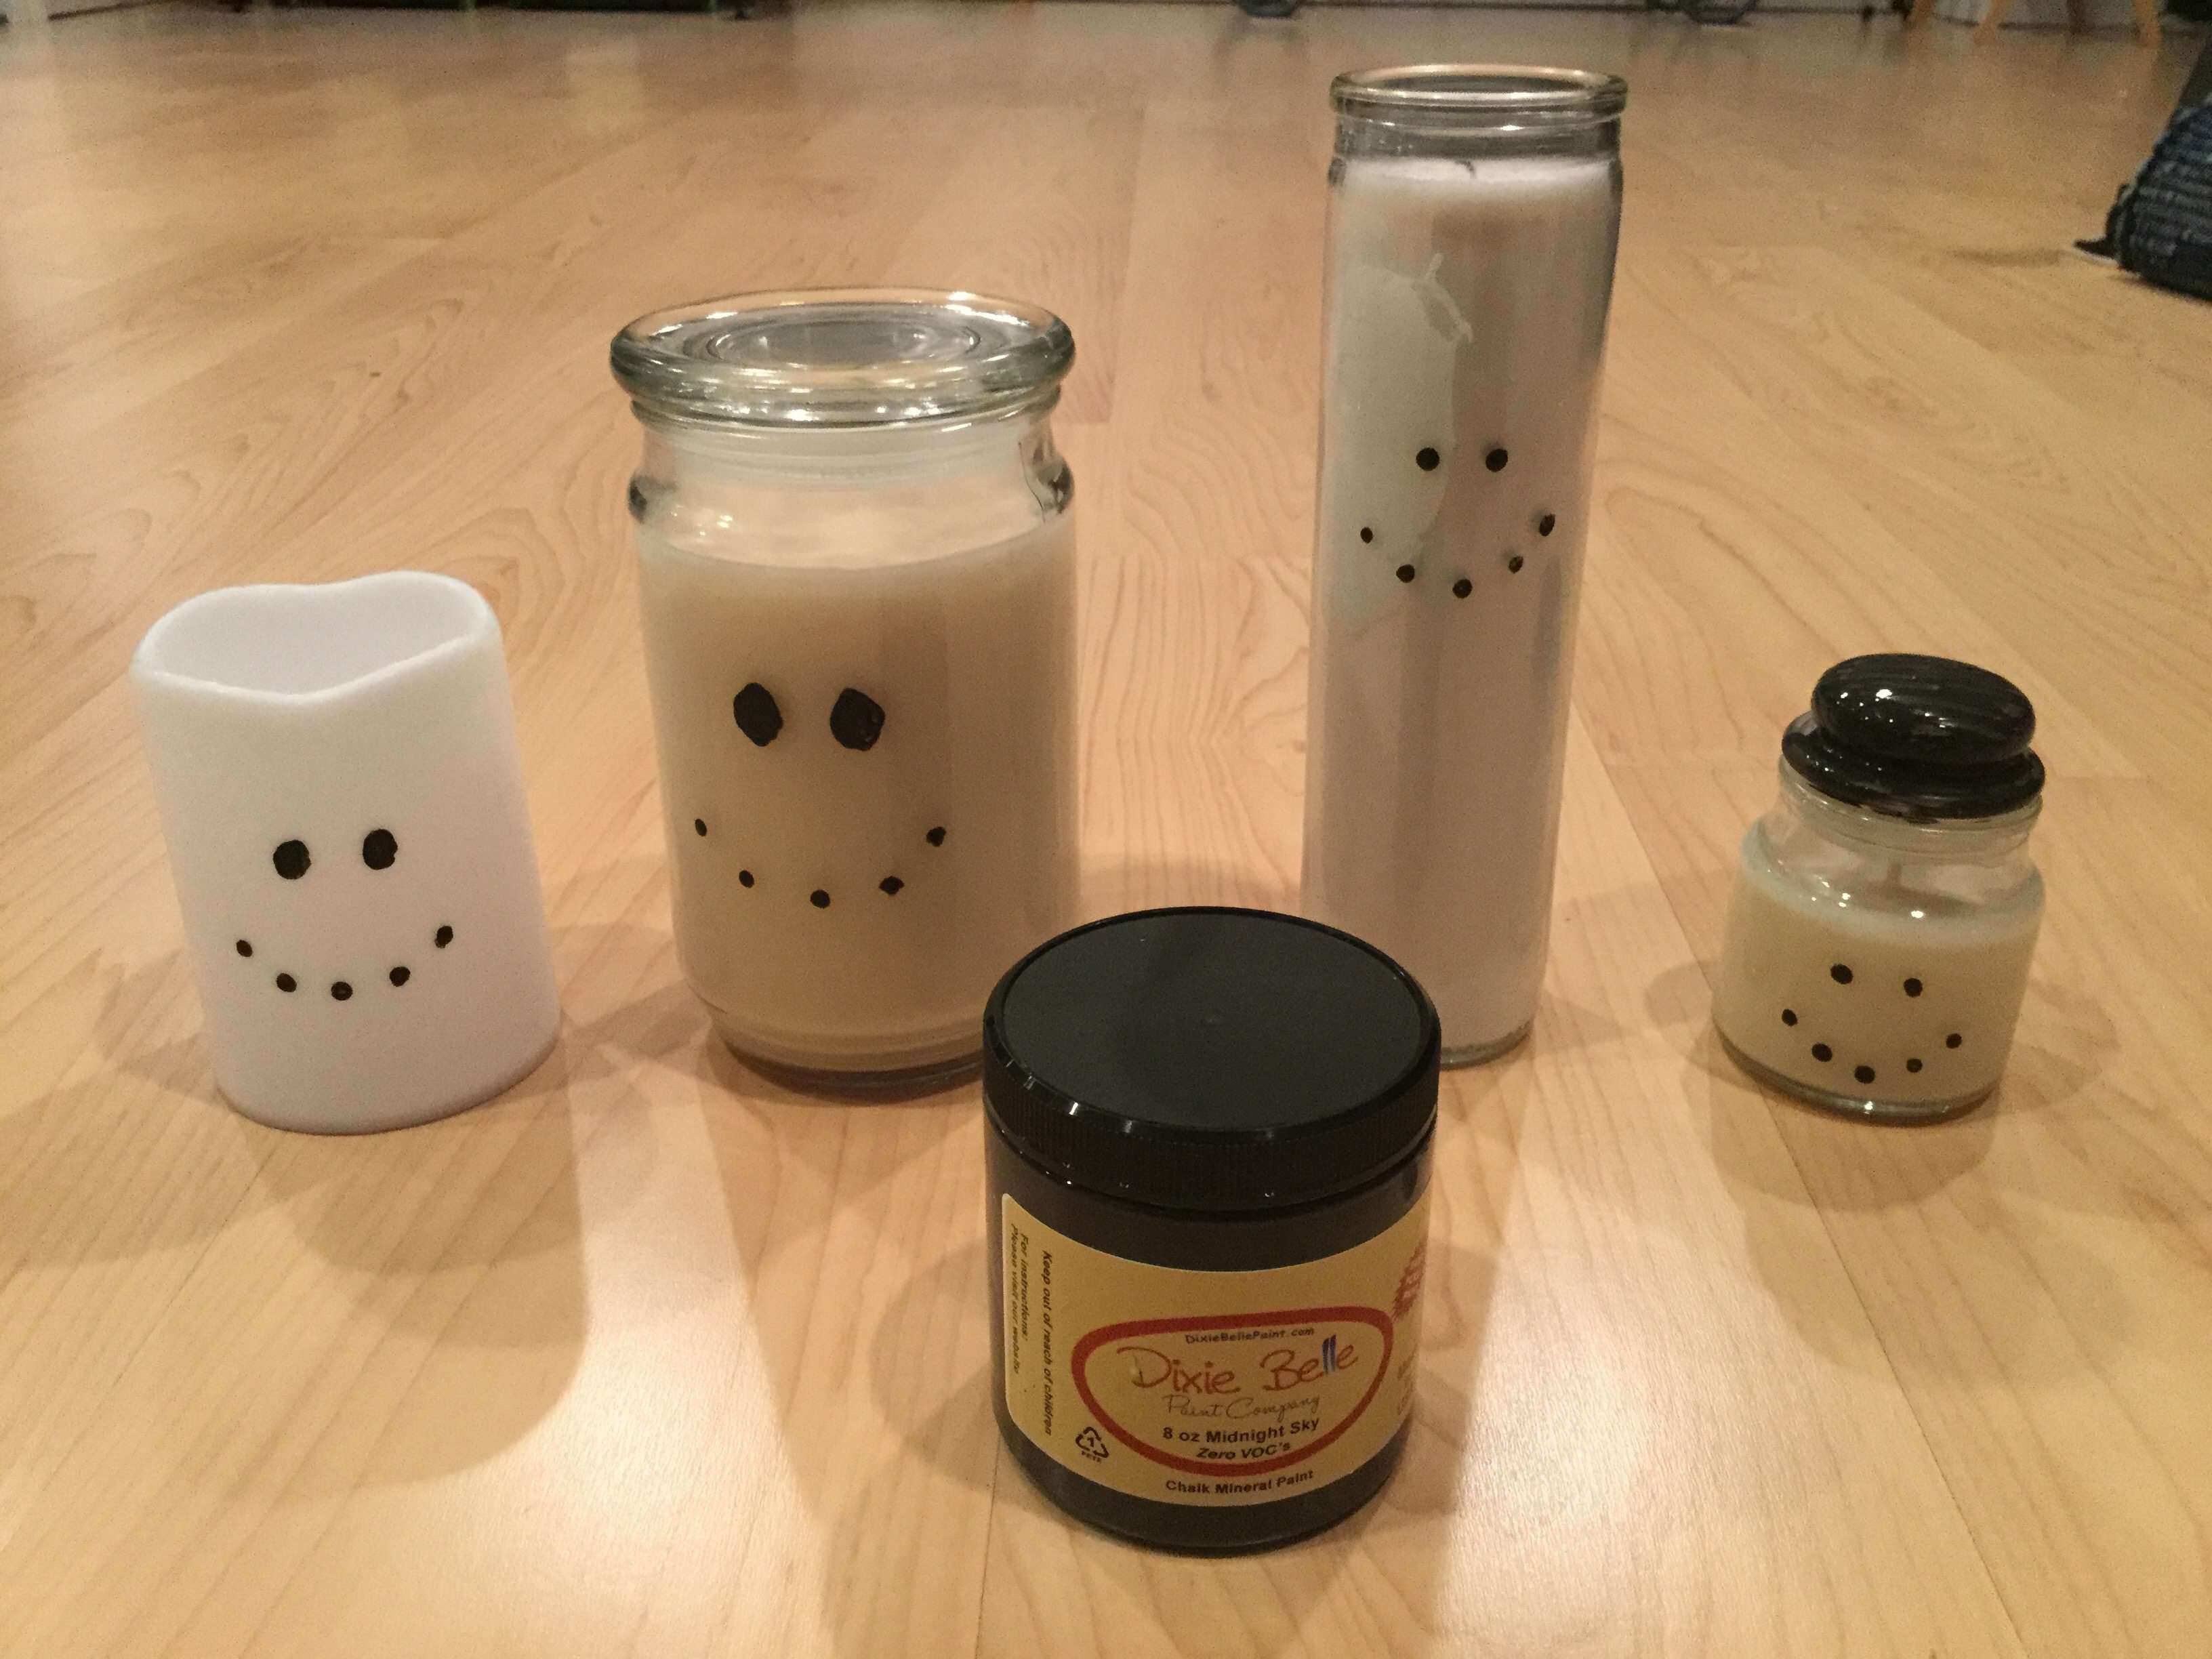 First use black paint to paint on the snowman face of your choice. You’ll see the candle on the right I decided to paint his lid as a hat. The candle on the left is a battery operated candle, but you could do this on pillar candles as well.